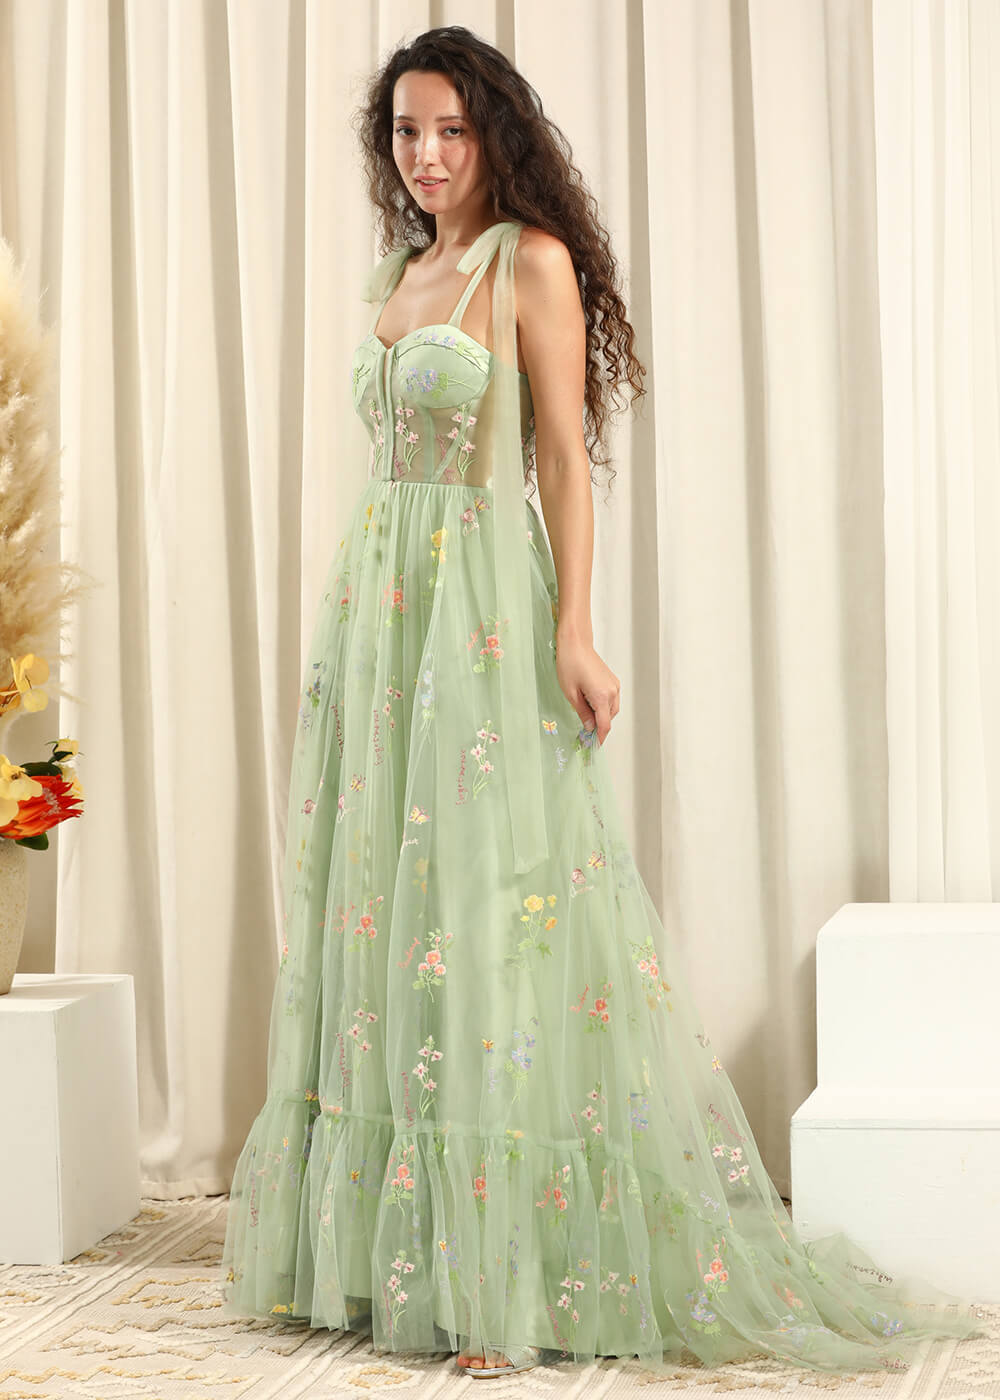 Green Tulle Flower Embroidery Adjustable Strap A-line Long Bridesmaid Dress